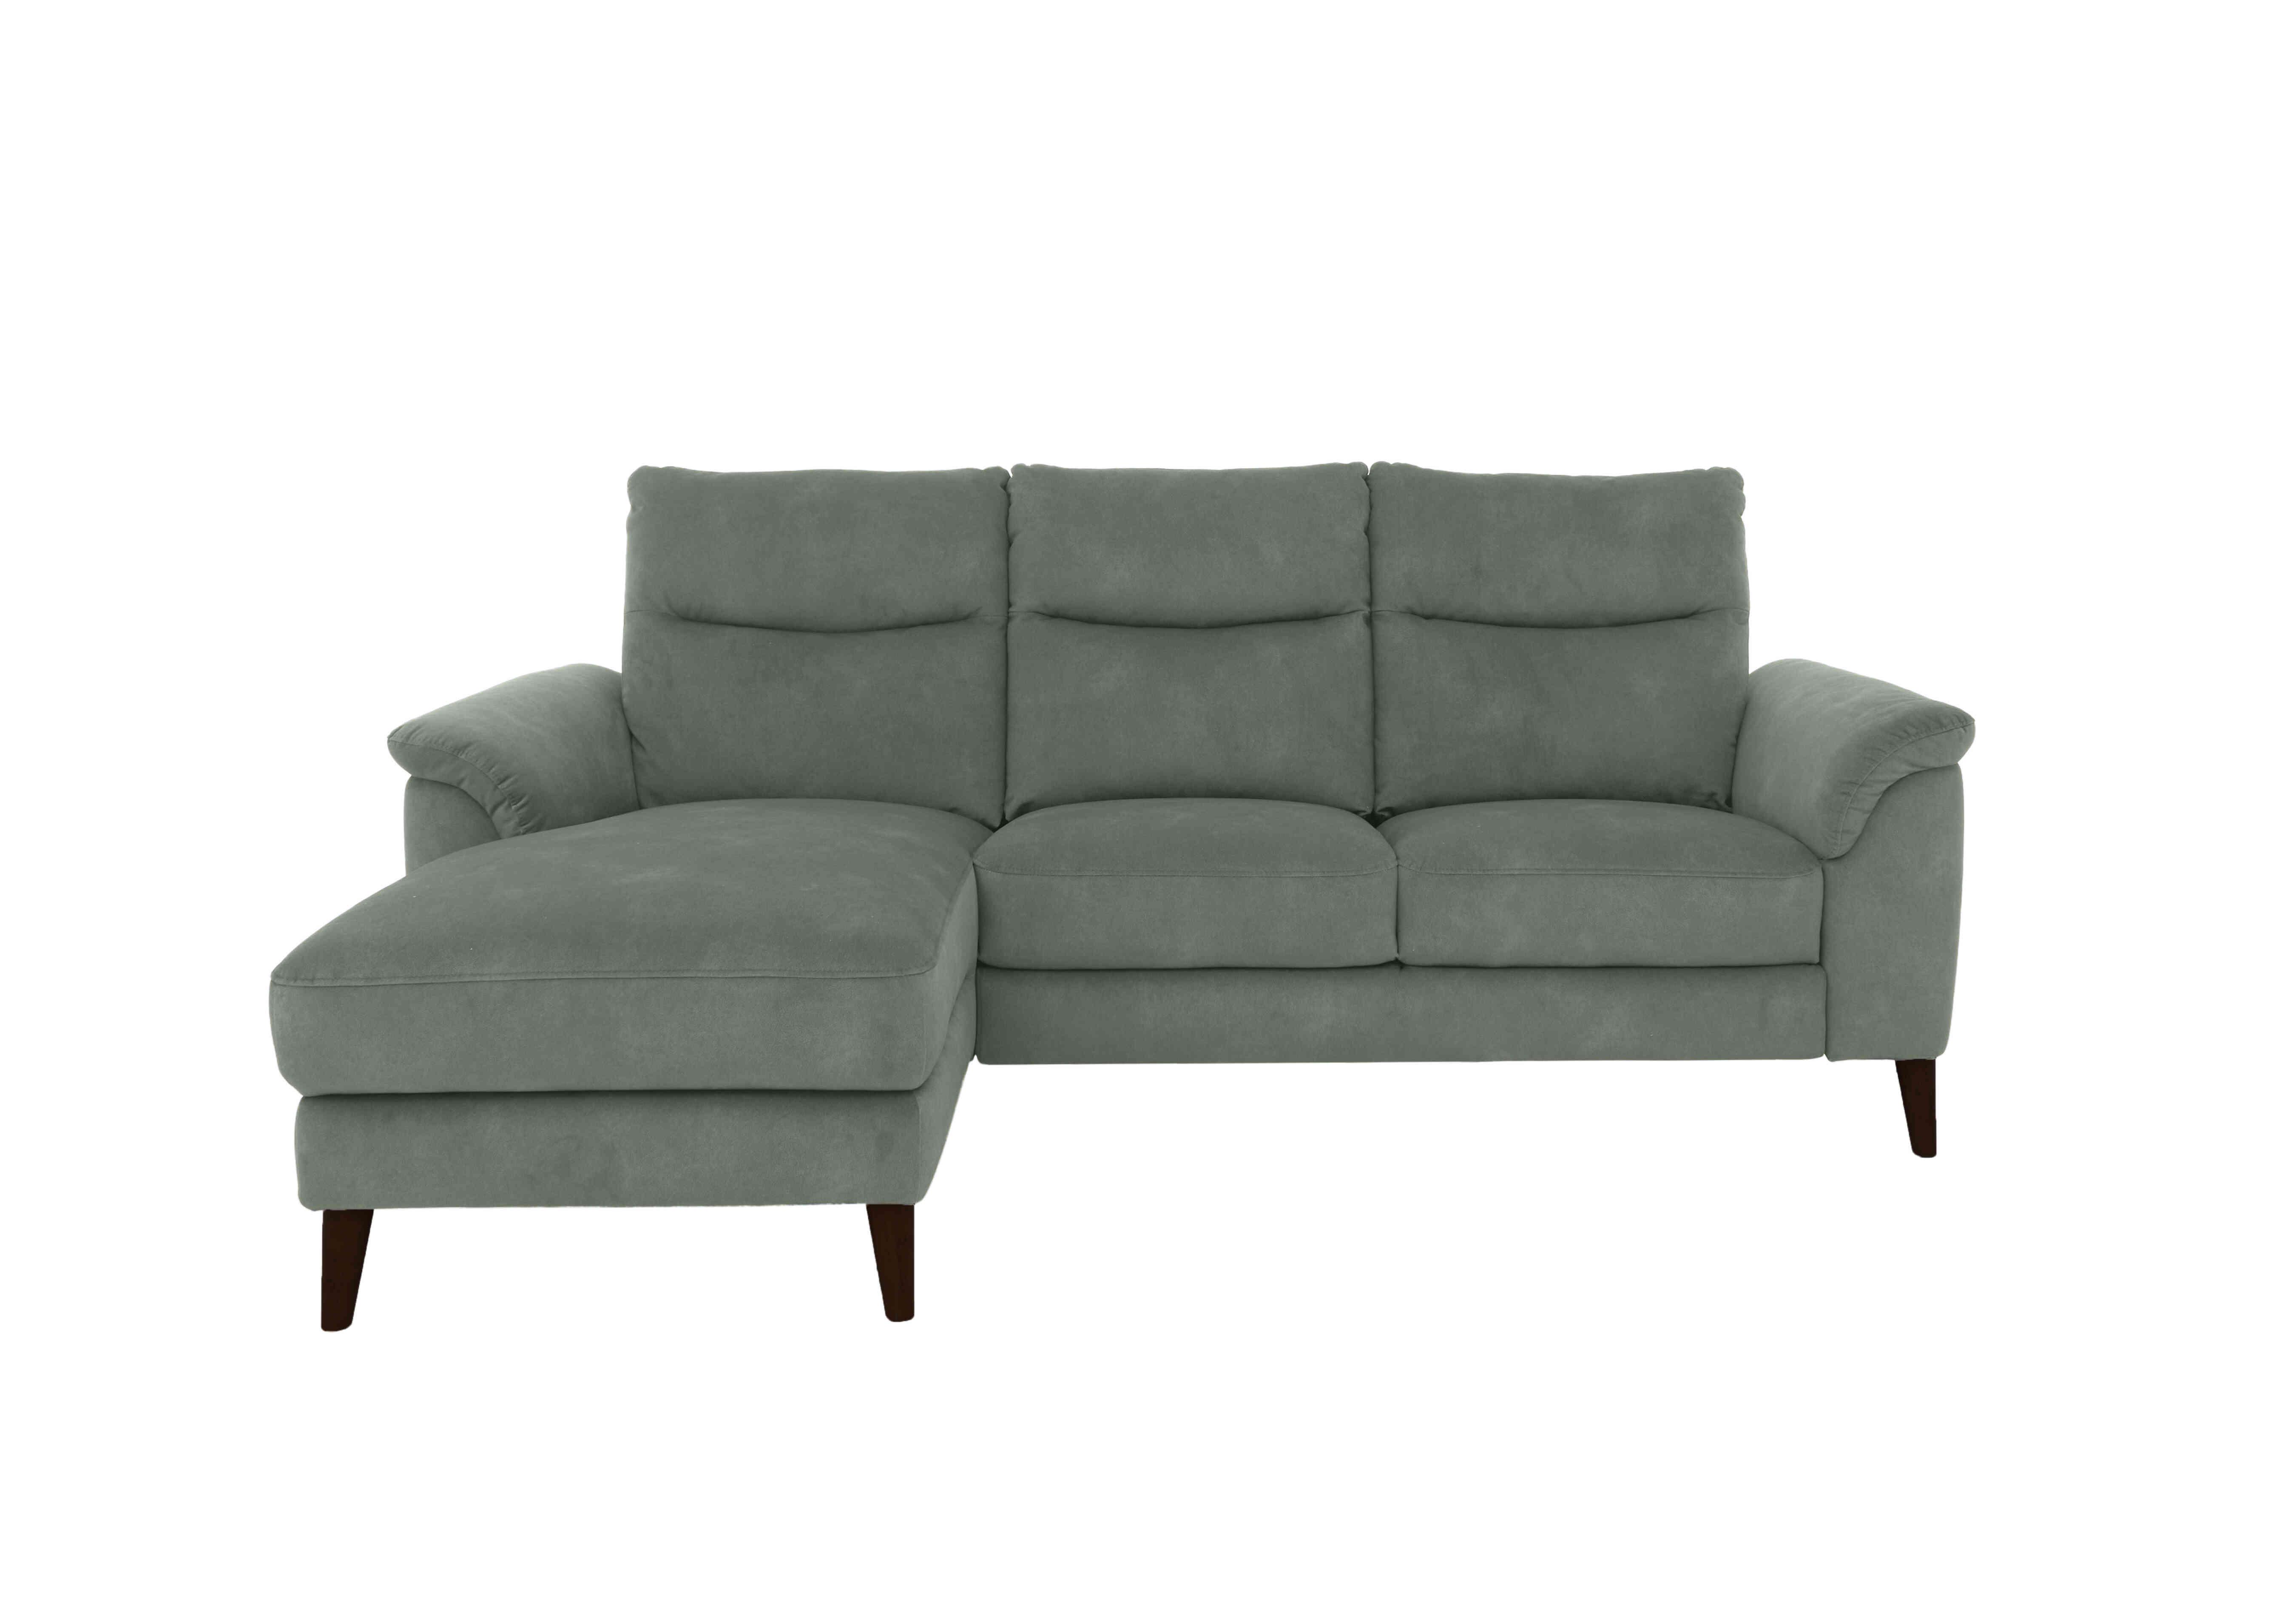 Morgan 3 Seater Fabric Sofa with Chaise End in Fern Dexter 14 43514 on Furniture Village